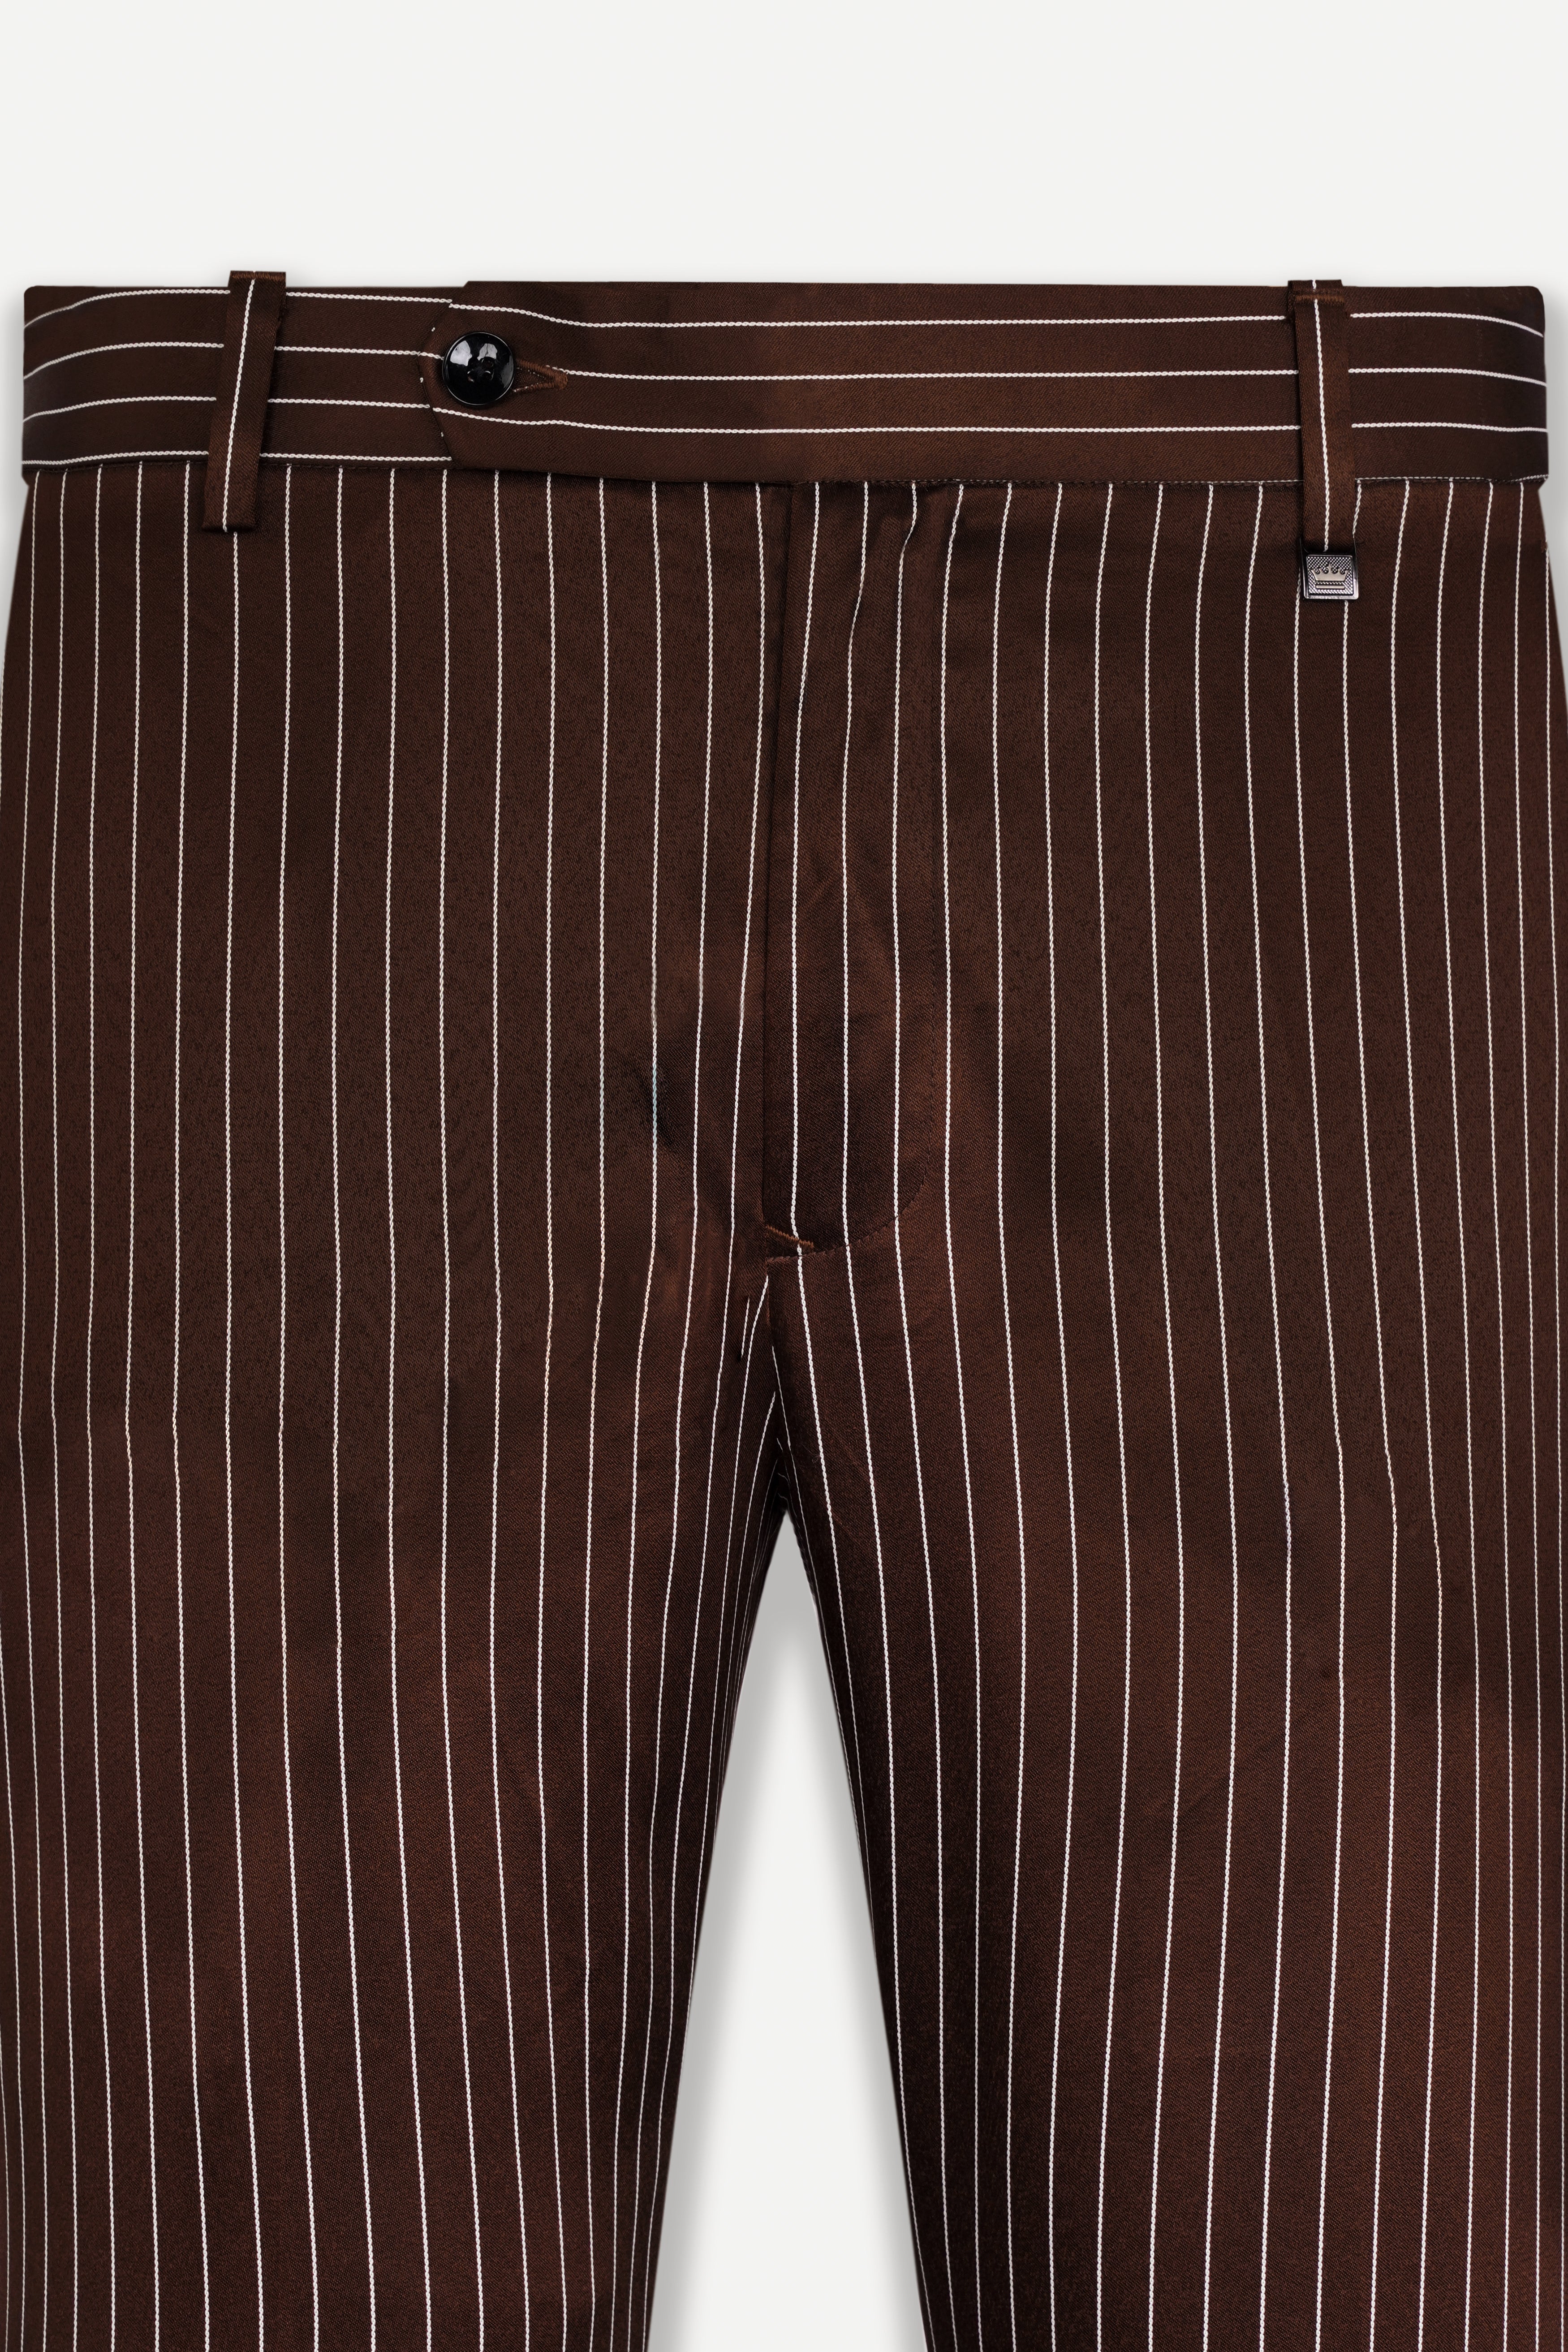 Cork Brown and White Striped Wool Rich Stretchable Waistband Pant